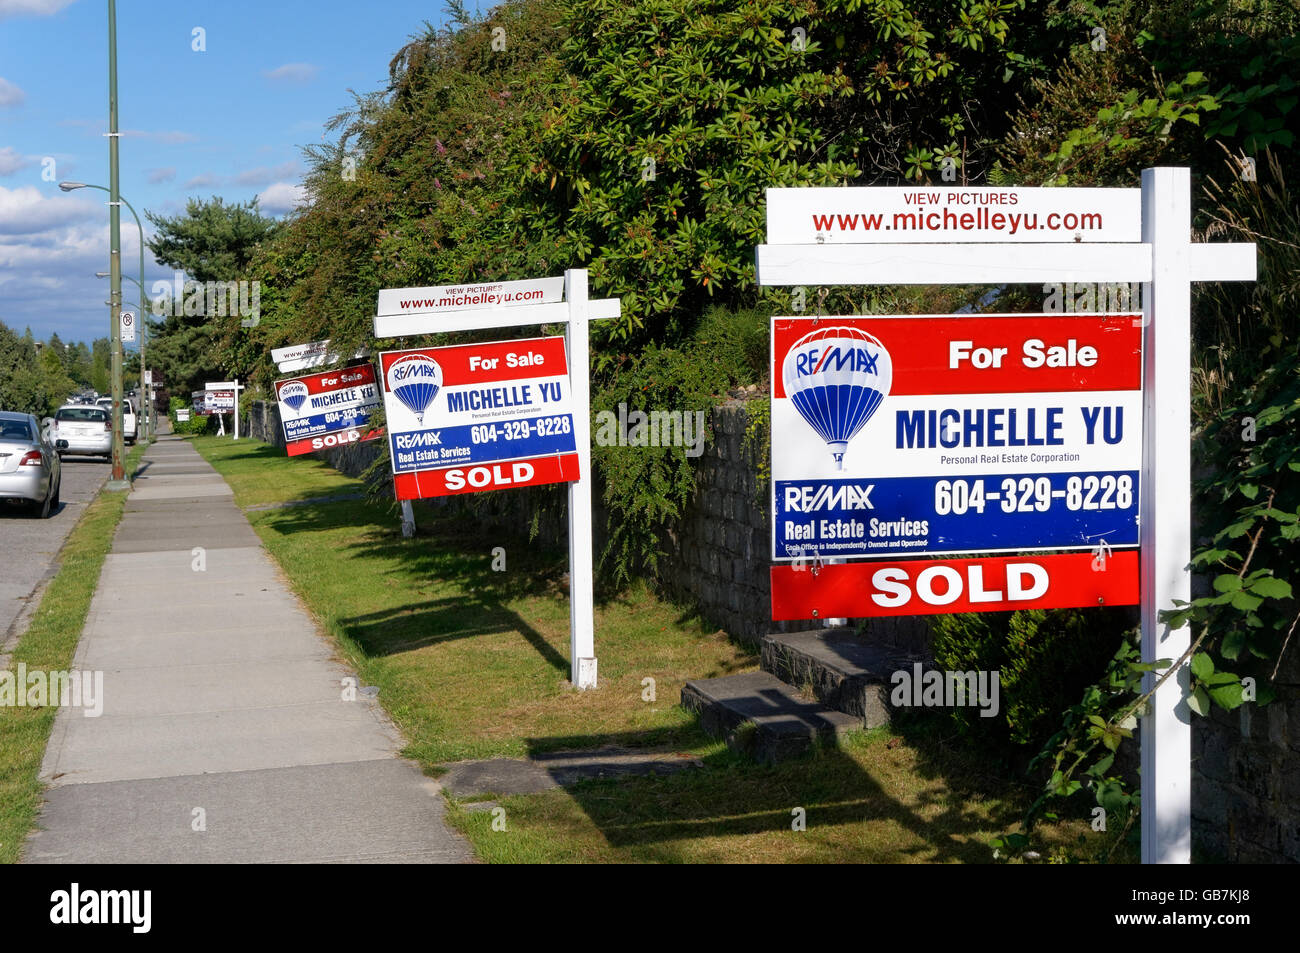 Houses for sale and sold real estate residentialsigns lining a street in Vancouver, British Columbia, Canada Stock Photo